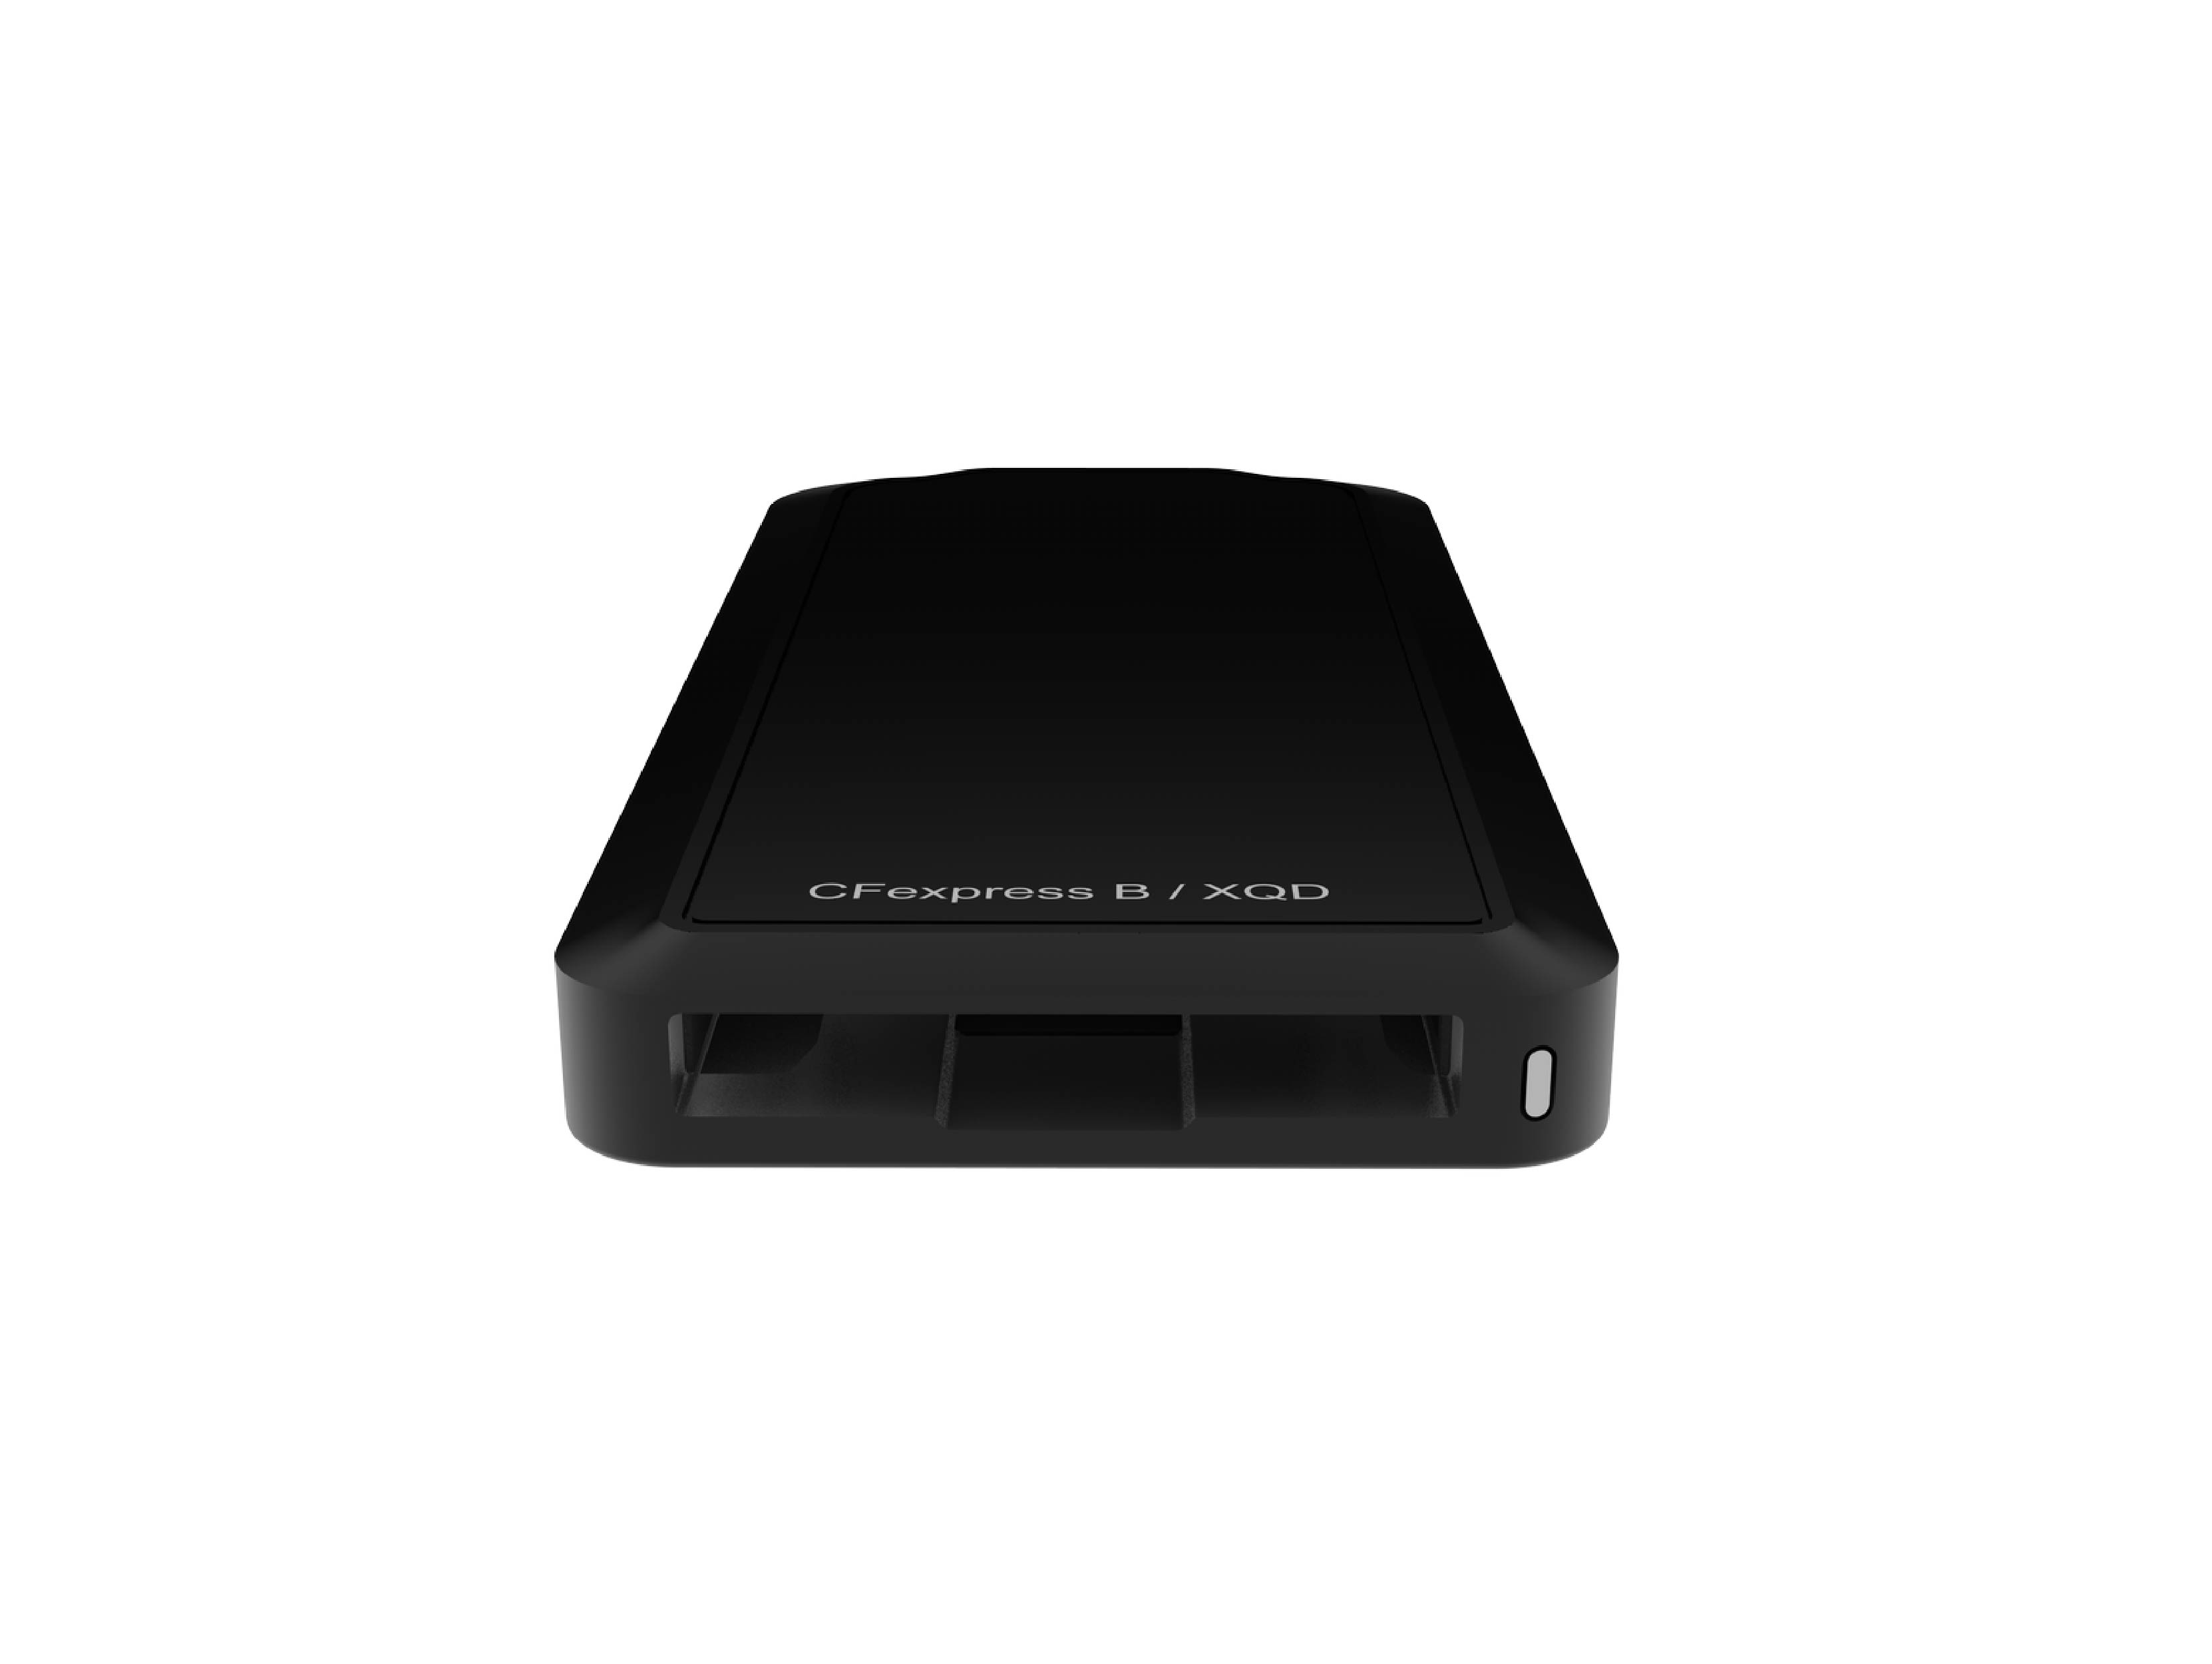 TBT3/USB CFExpress Card Reader (SI-4201TB3), applicable CF Express Type-B reader, Thunderbolt™3 supports 40Gbps to host.